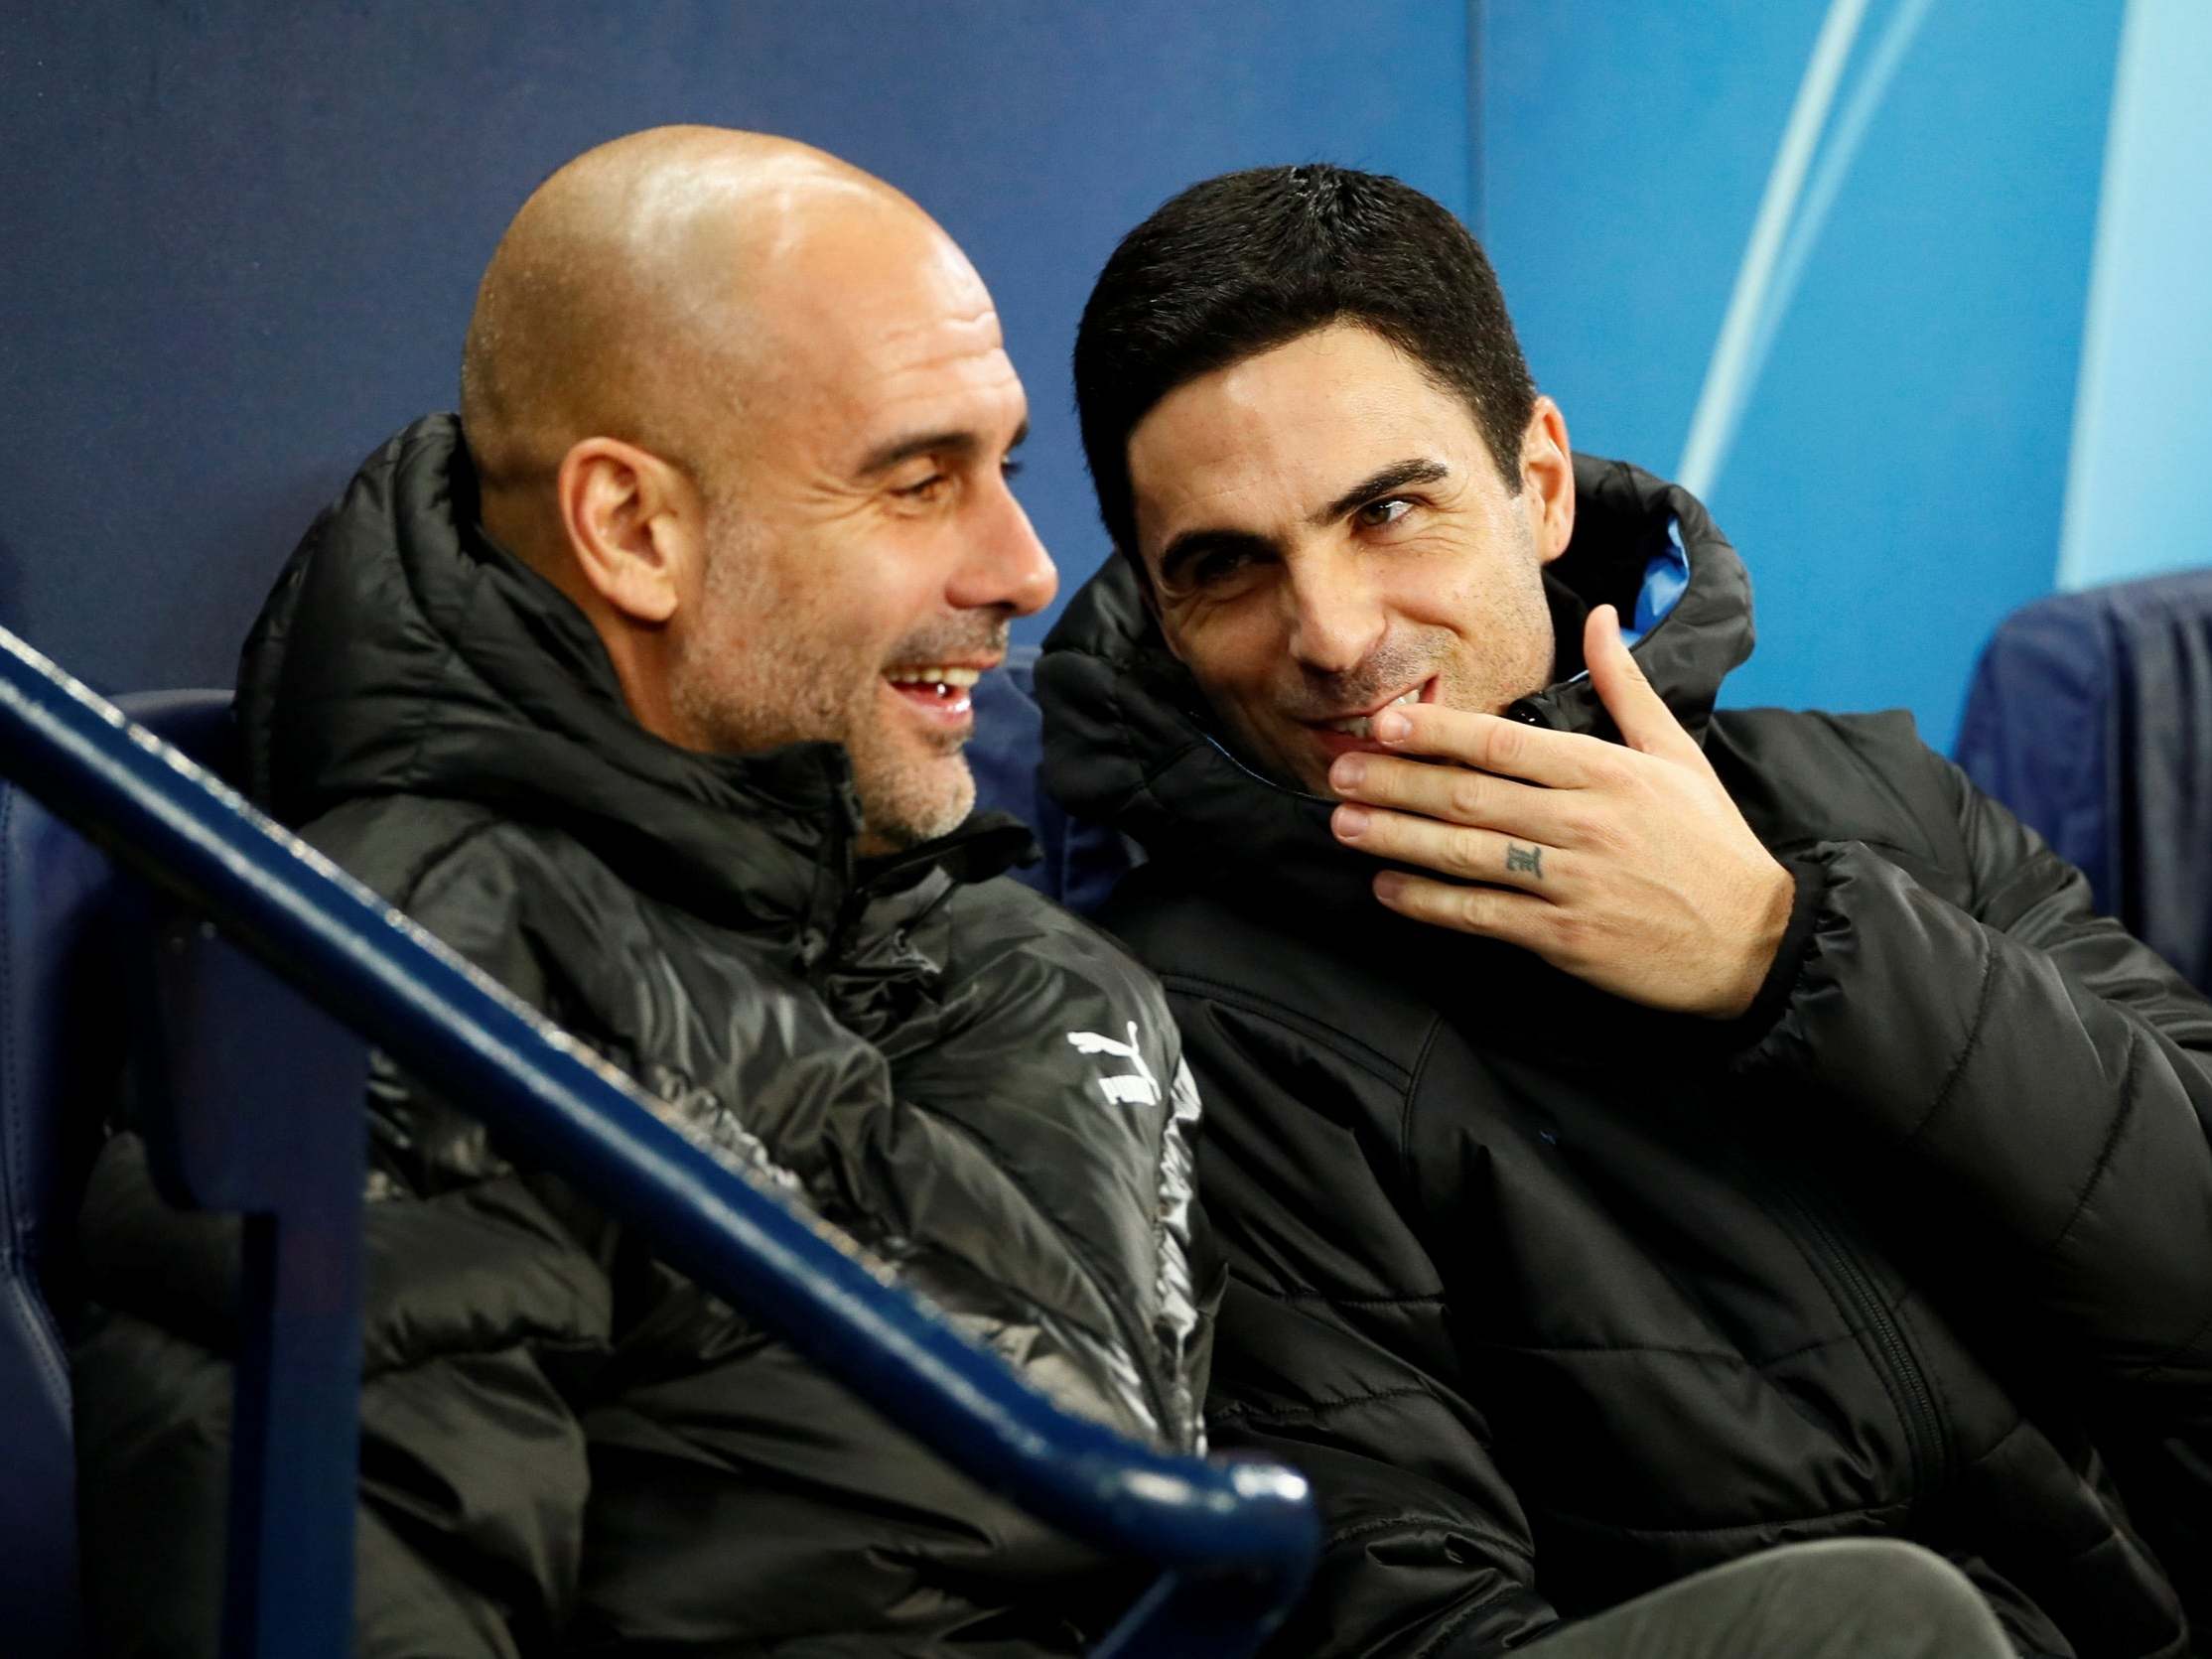 Manchester City manager Pep Guardiola and assistant coach Mikel Arteta